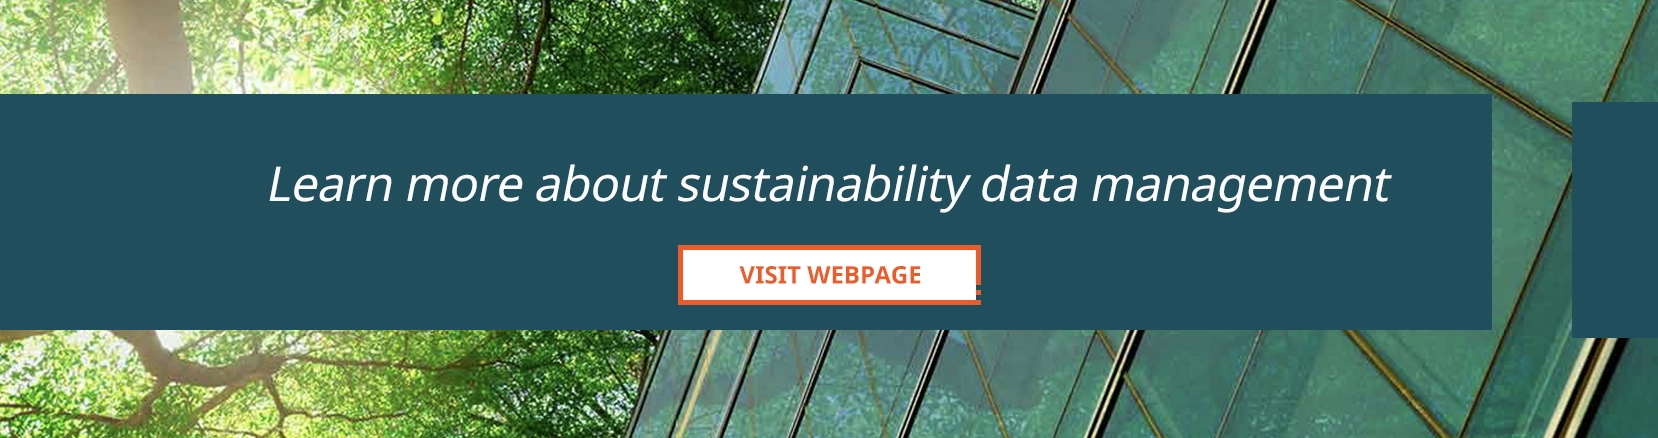 learn more about sustainability data management